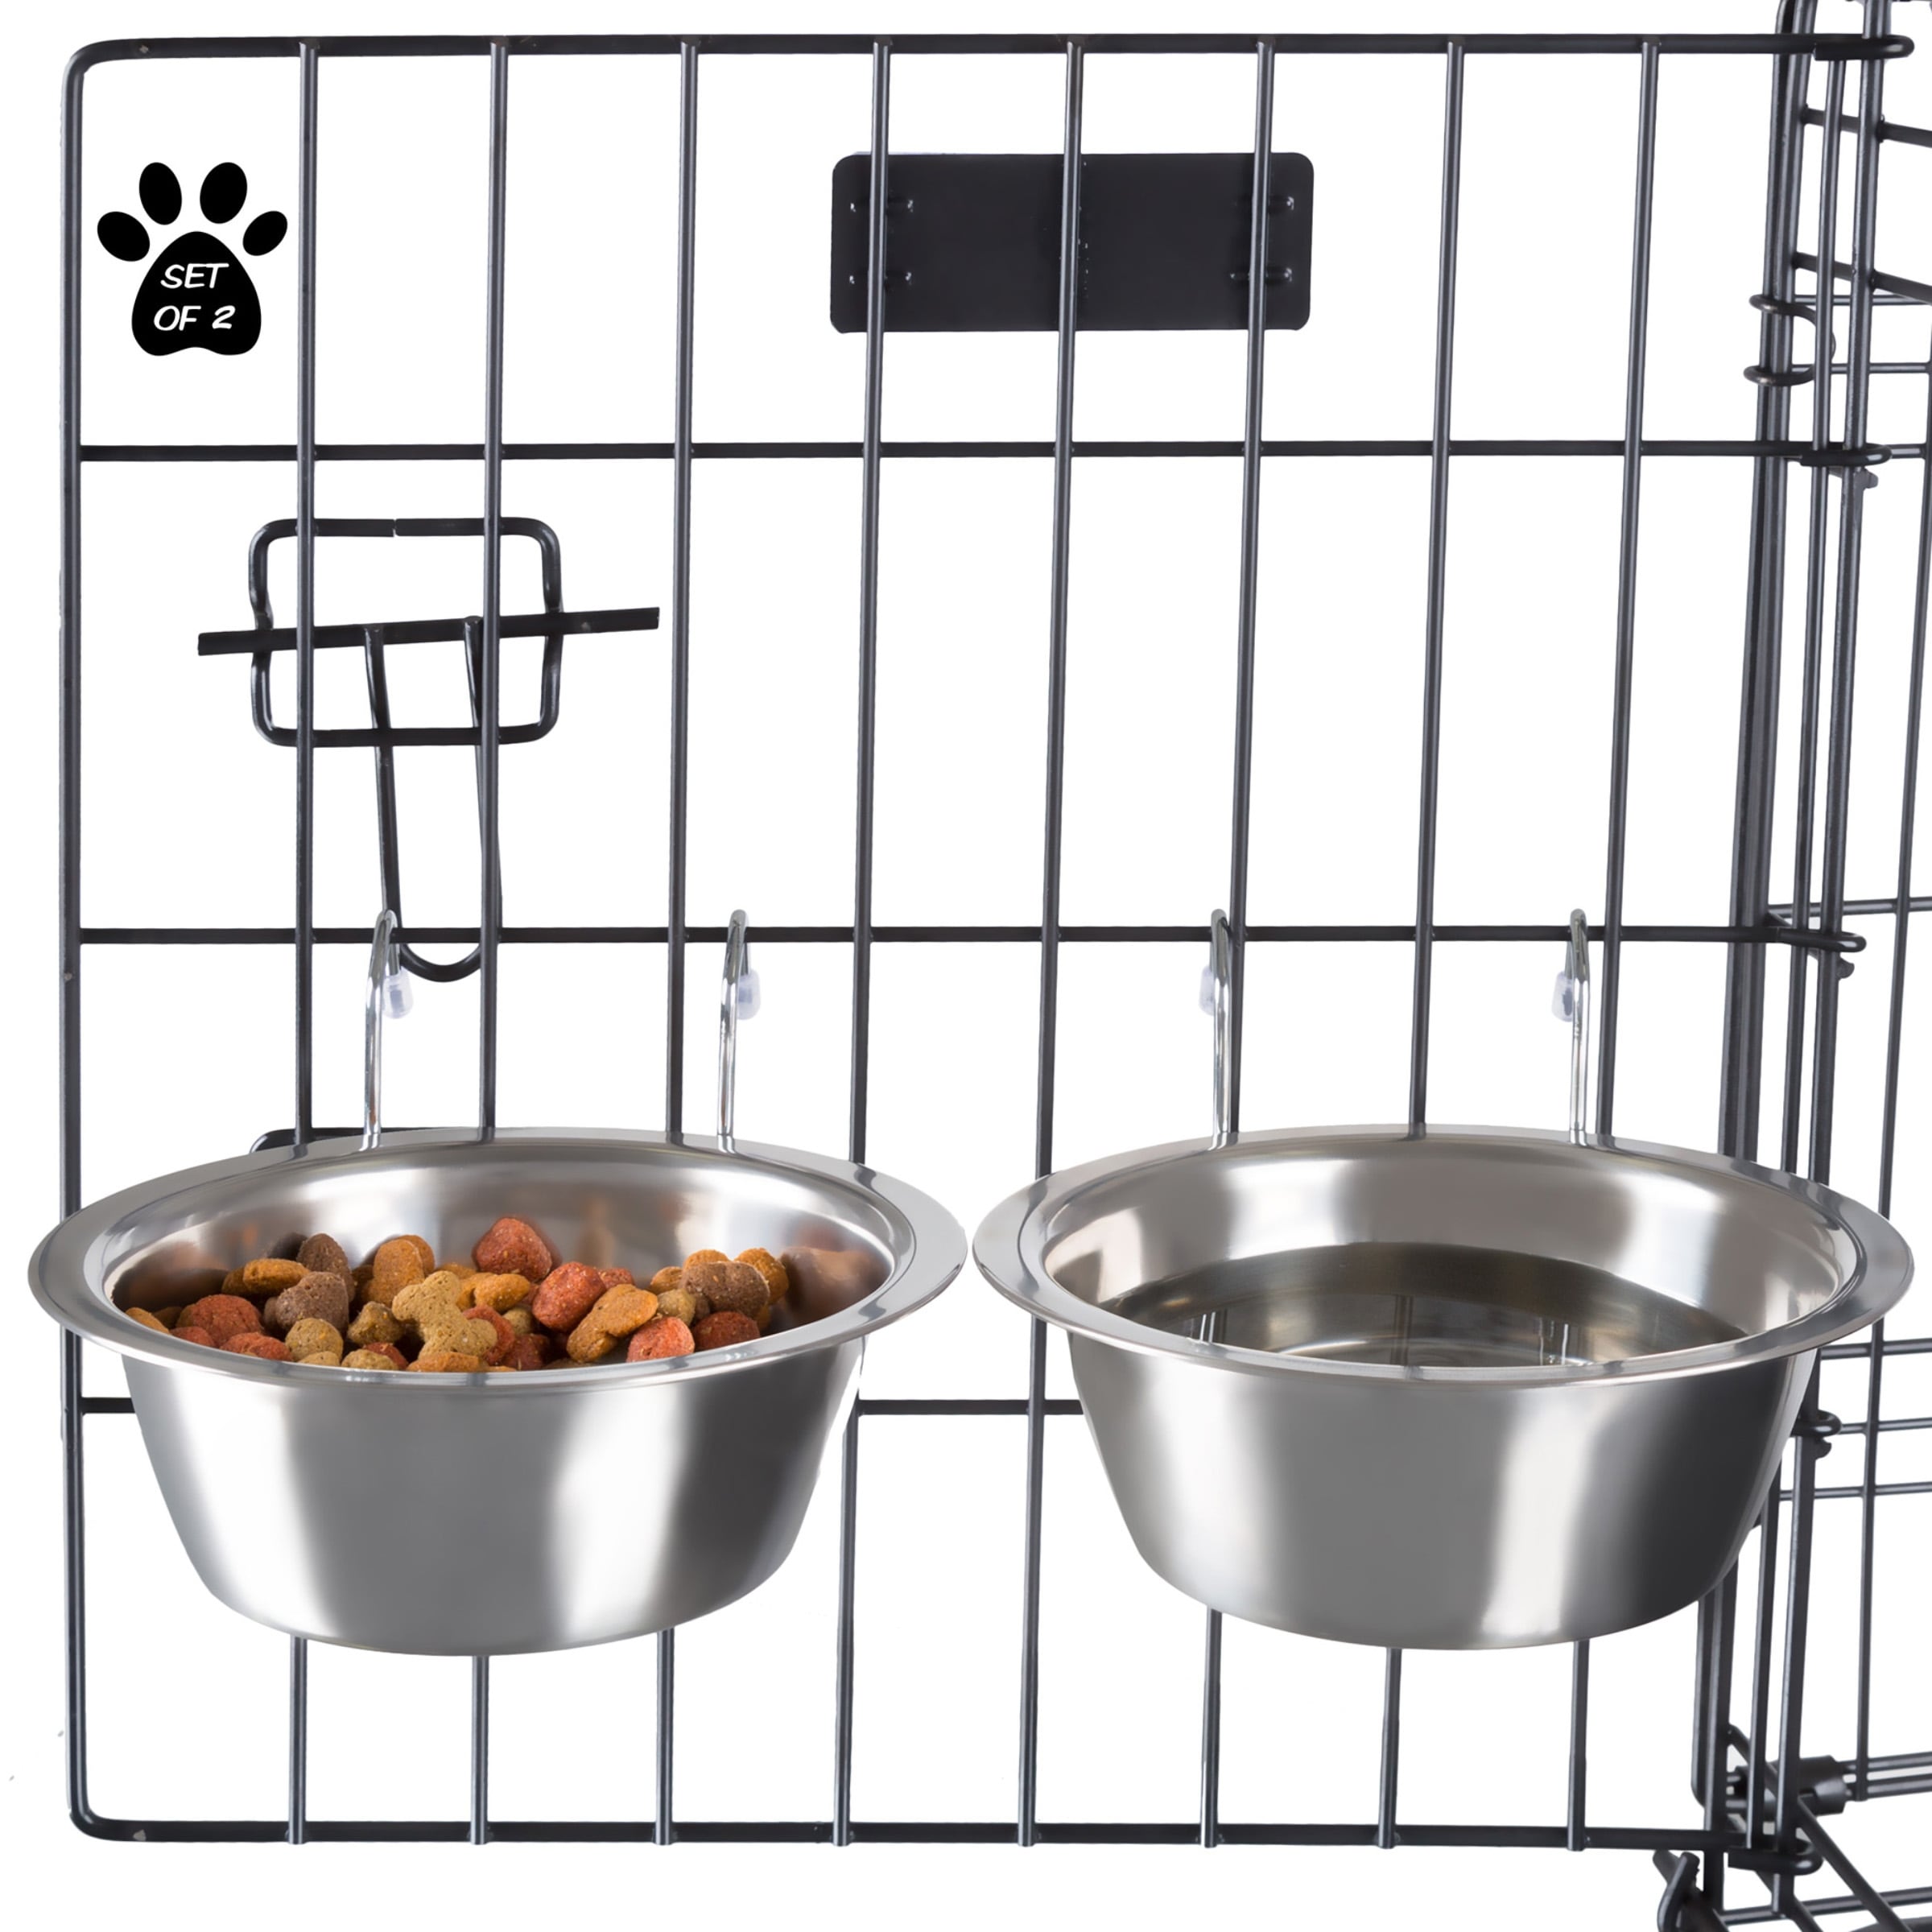 https://ak1.ostkcdn.com/images/products/is/images/direct/6a4a23230a436f3567e8c02ec603949093f8883e/Pet-Pal-Stainless-Steel-Hanging-Pet-Bowls-for-Dogs-and-Cats--Cage%2C-Kennel%2C-and-Crate-Feeder-Dish-for-Food-and-Water--Set-of-2.jpg